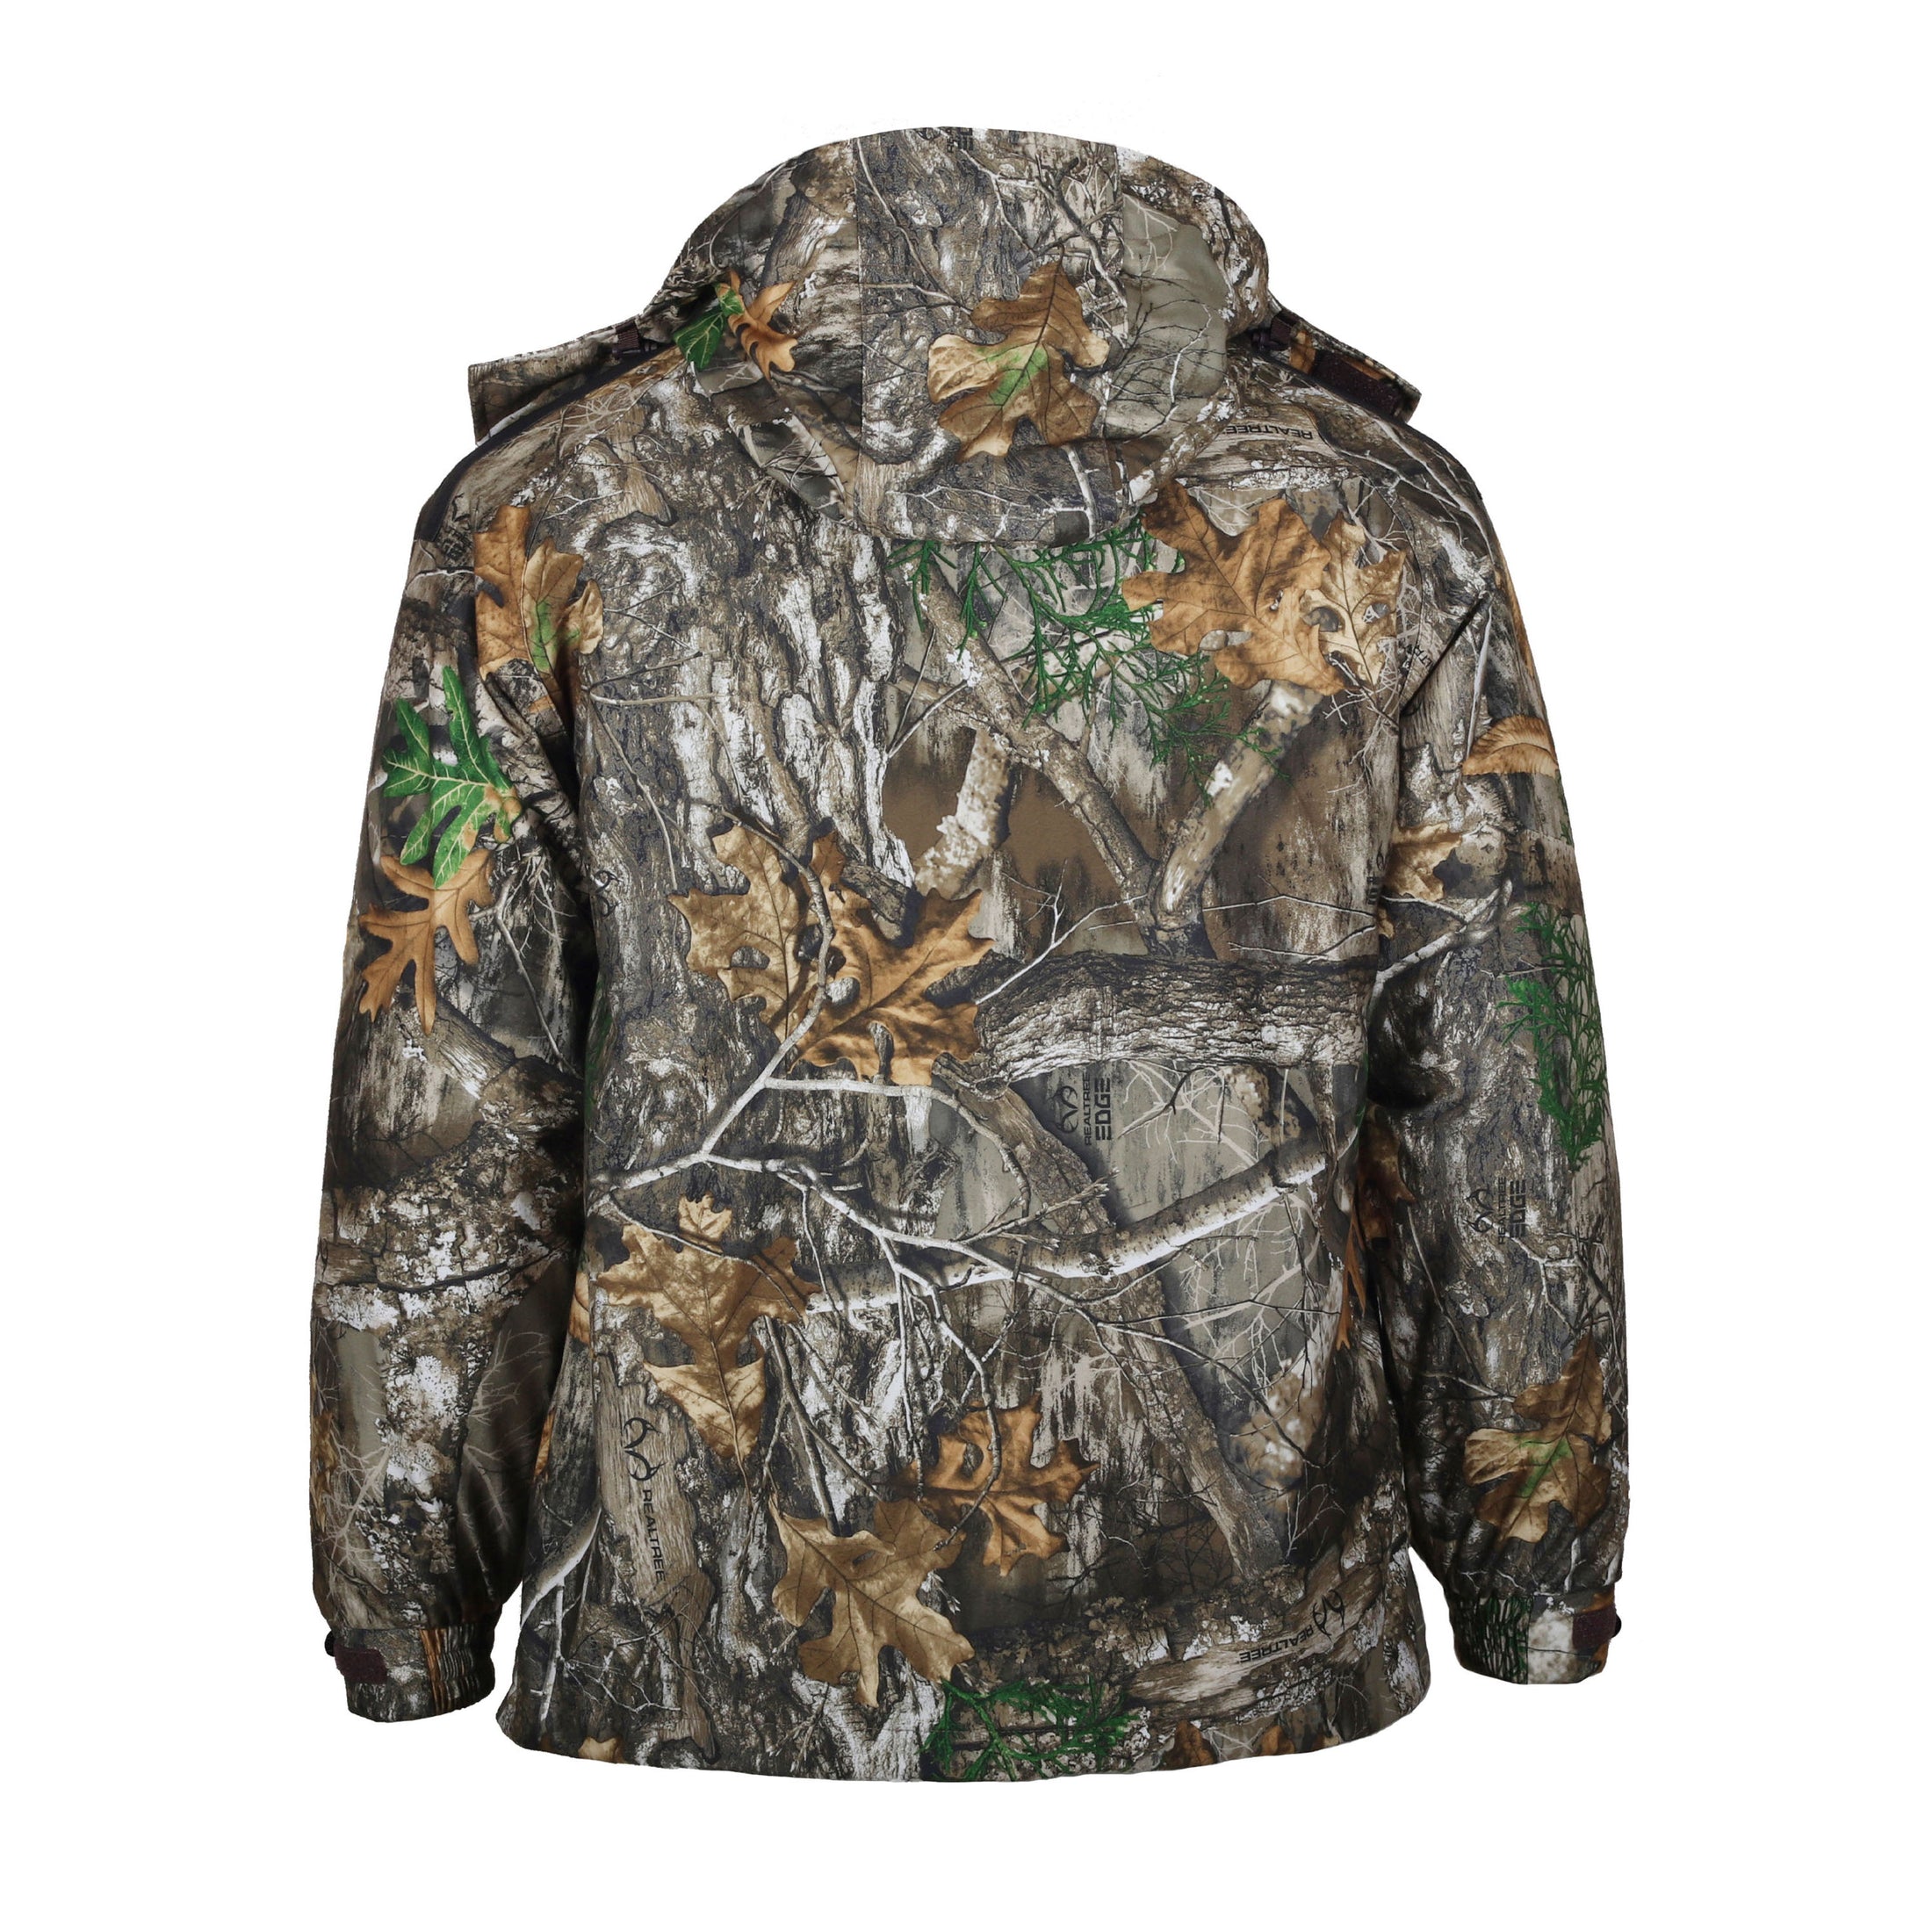 gamehide wild systems parka back view (realtree edge)